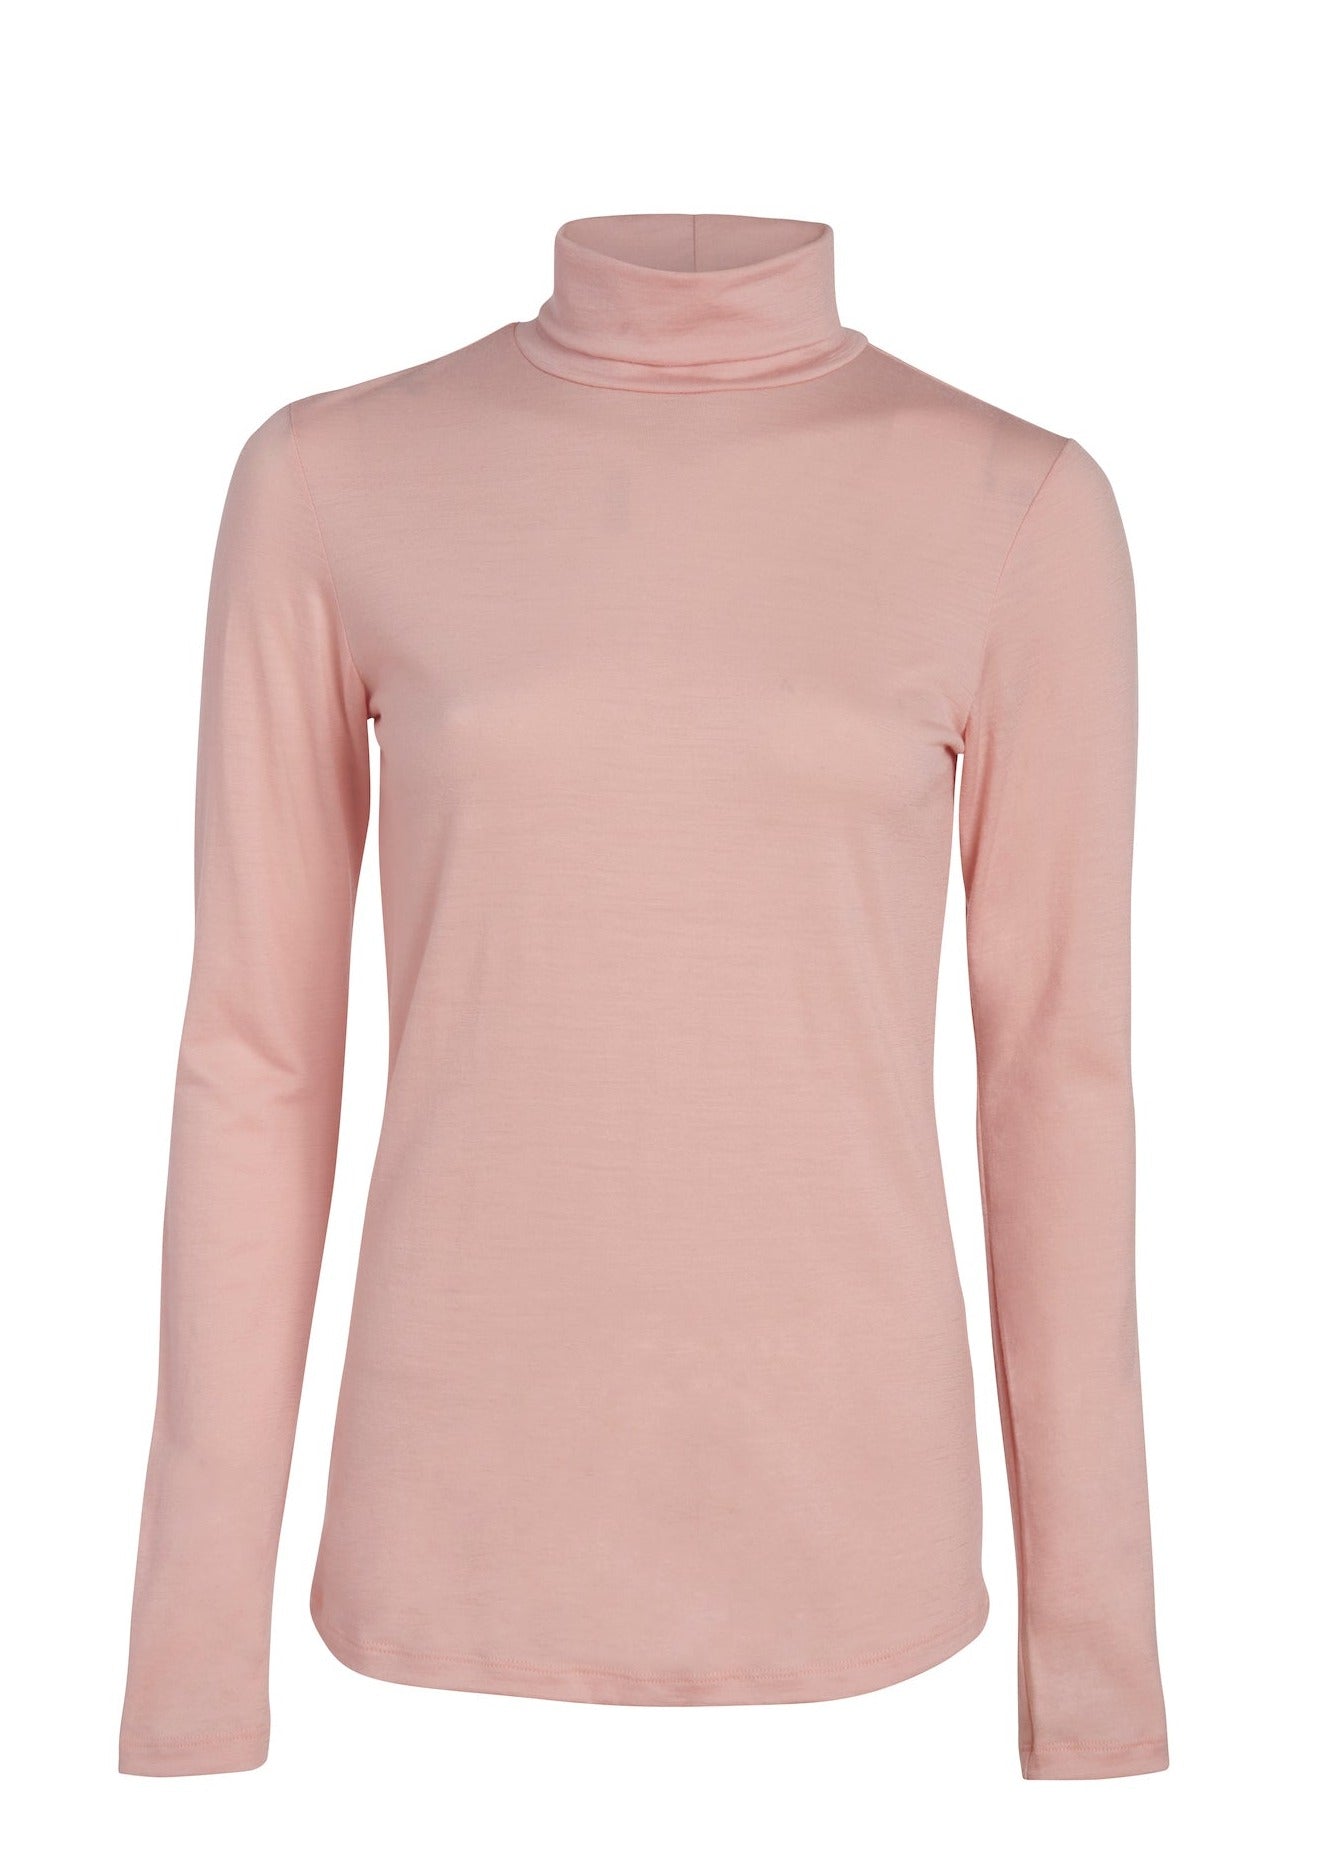 A timeless turtleneck, this layering essential is soft and breathable to wear all seasons. 